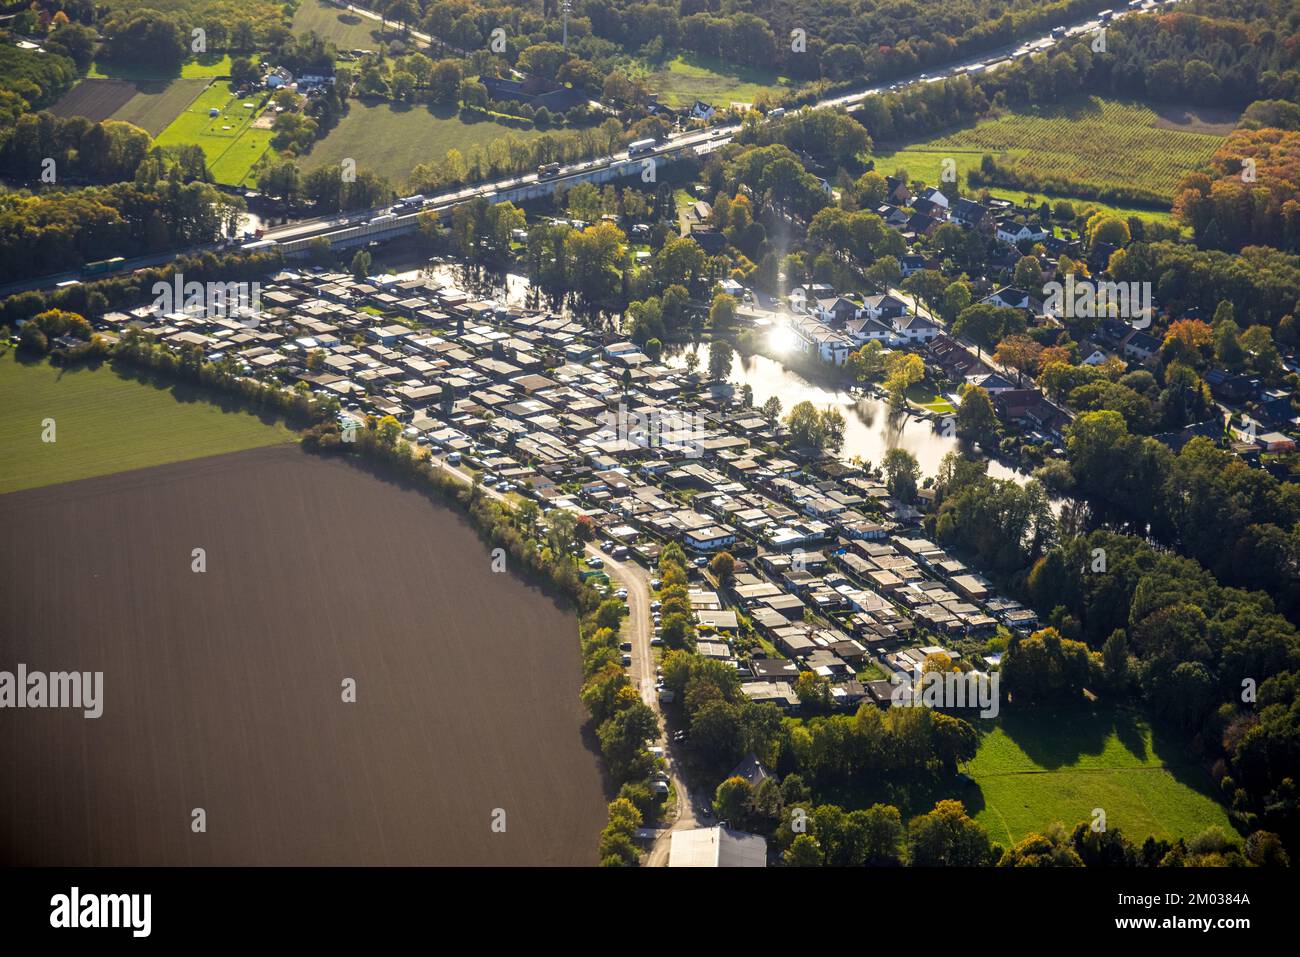 Aerial view, camping site Bej Wolters, camping site Schultes Kull, residential houses Neufelder Straße, Großer Parsick See, Vluyn, Neukirchen-Vluyn, R Stock Photo